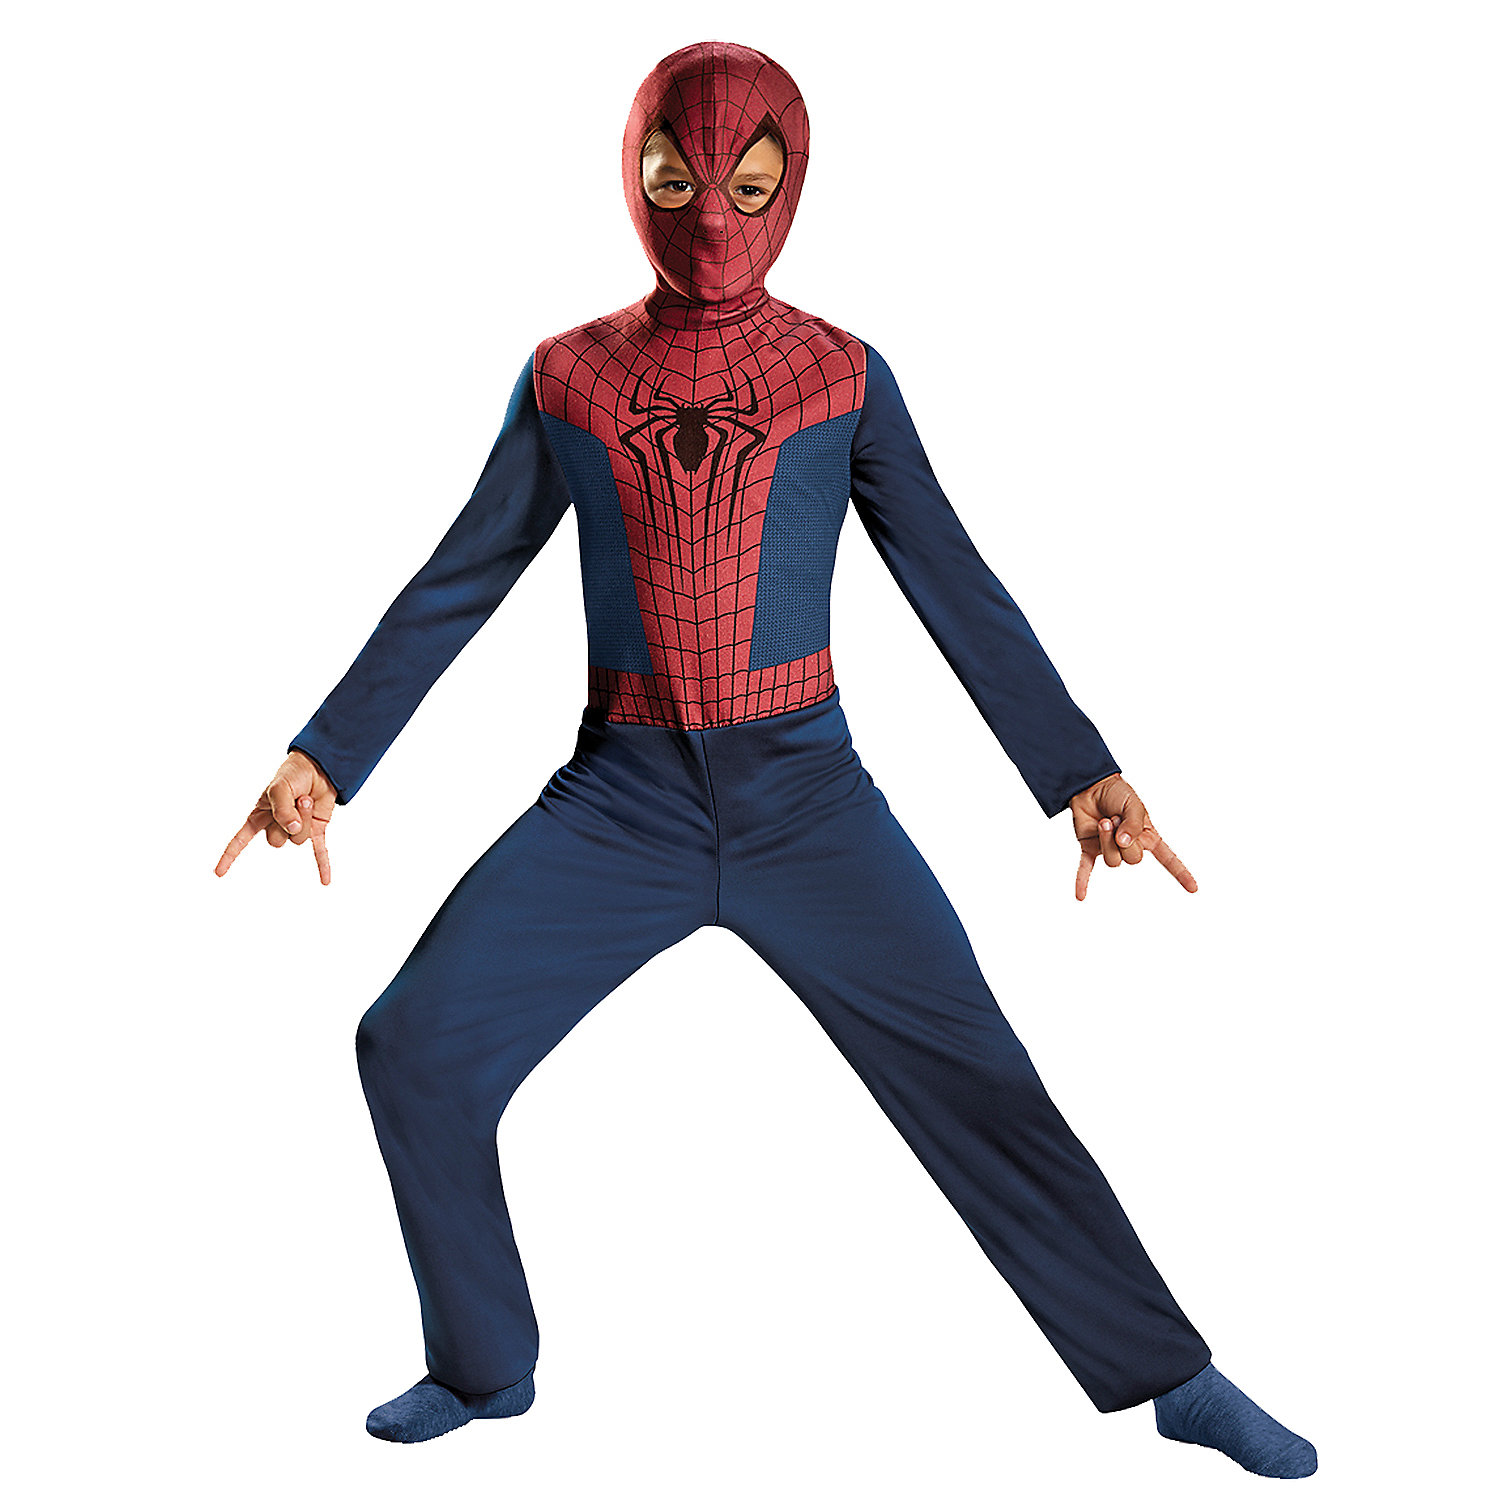 Disguise Boys' Marvel Spider-Man Jumpsuit Costume - Size 4-6 - image 1 of 2